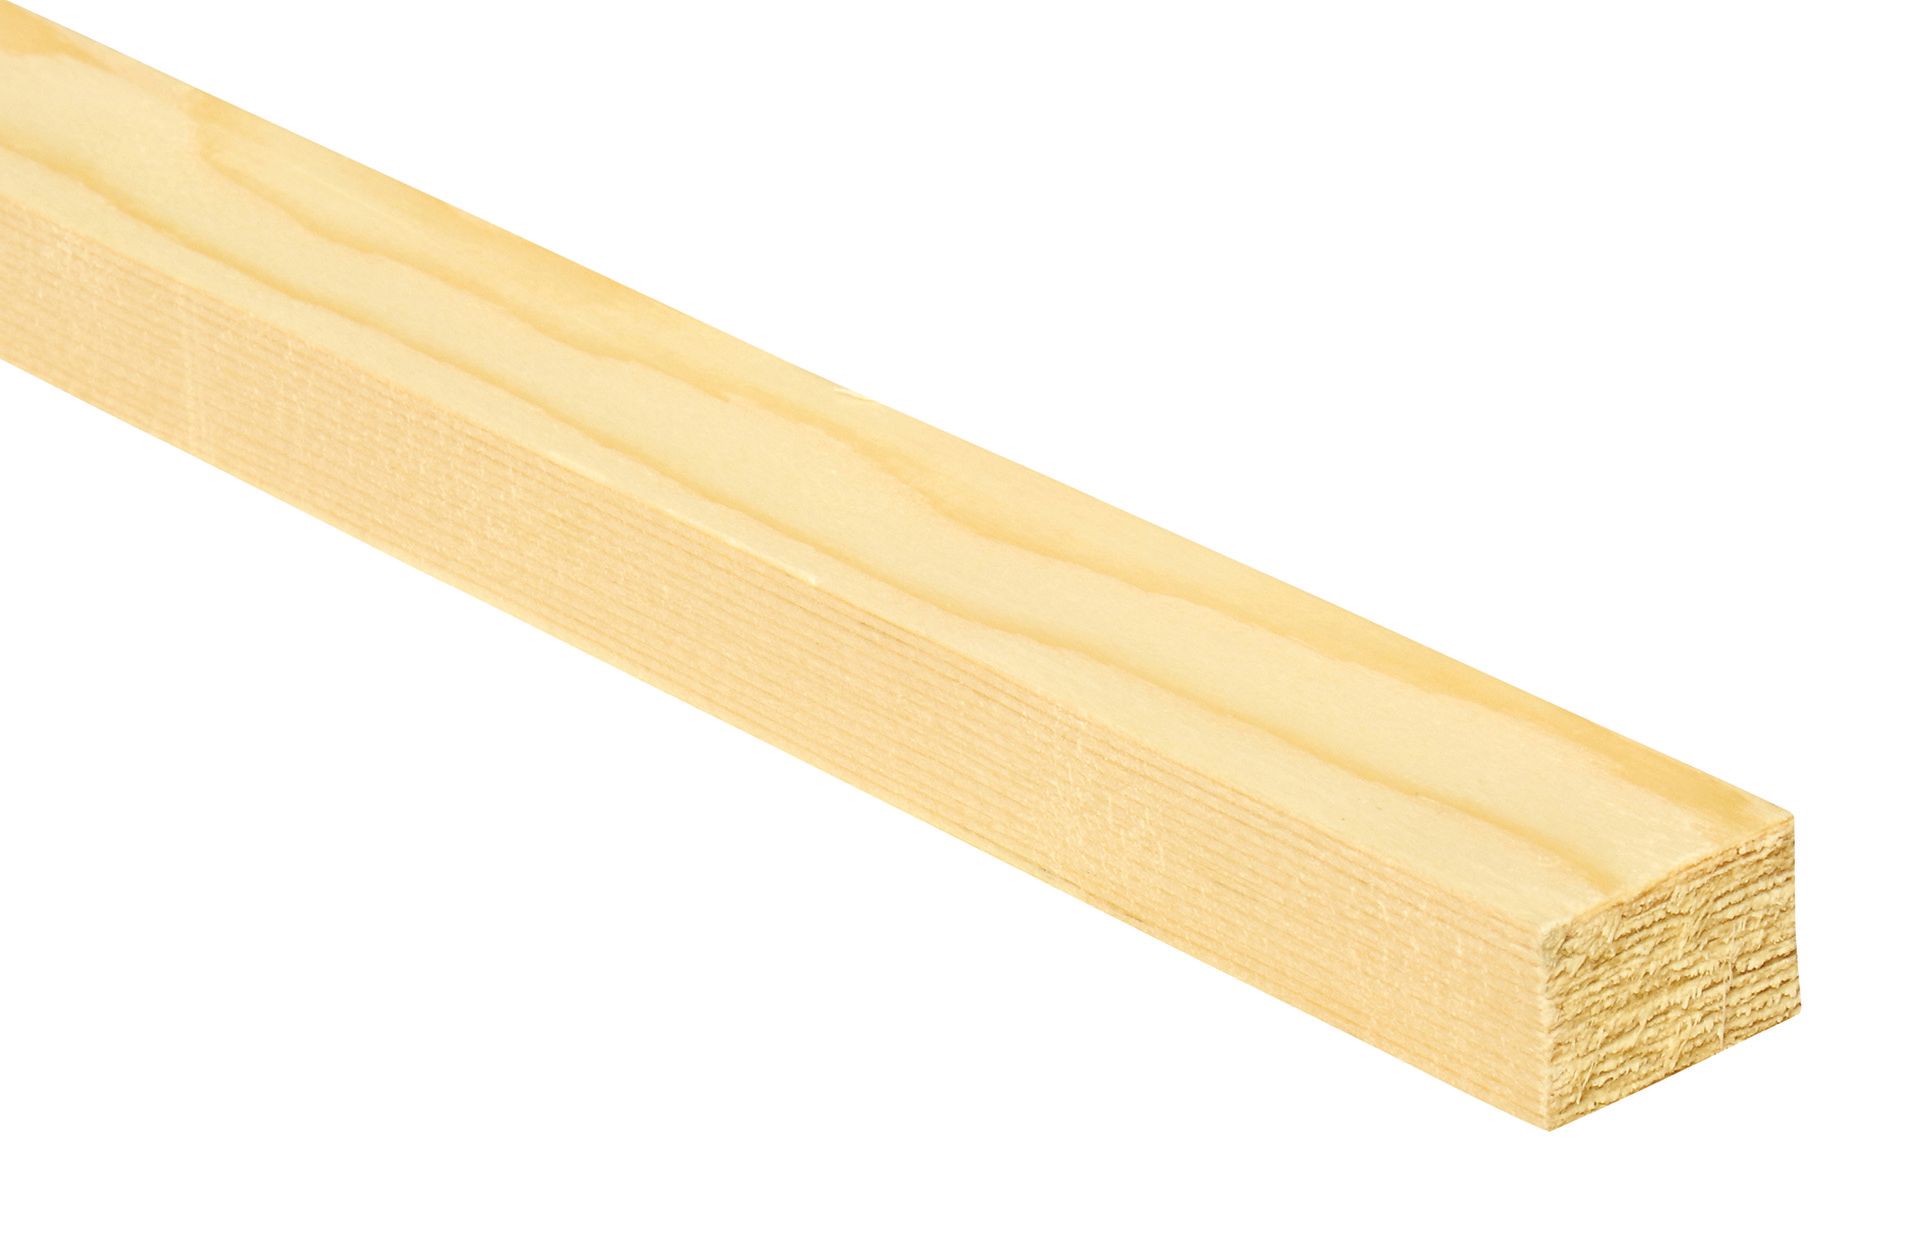 Wickes Whitewood PSE Timber - 18mm x 28mm x 2.4m